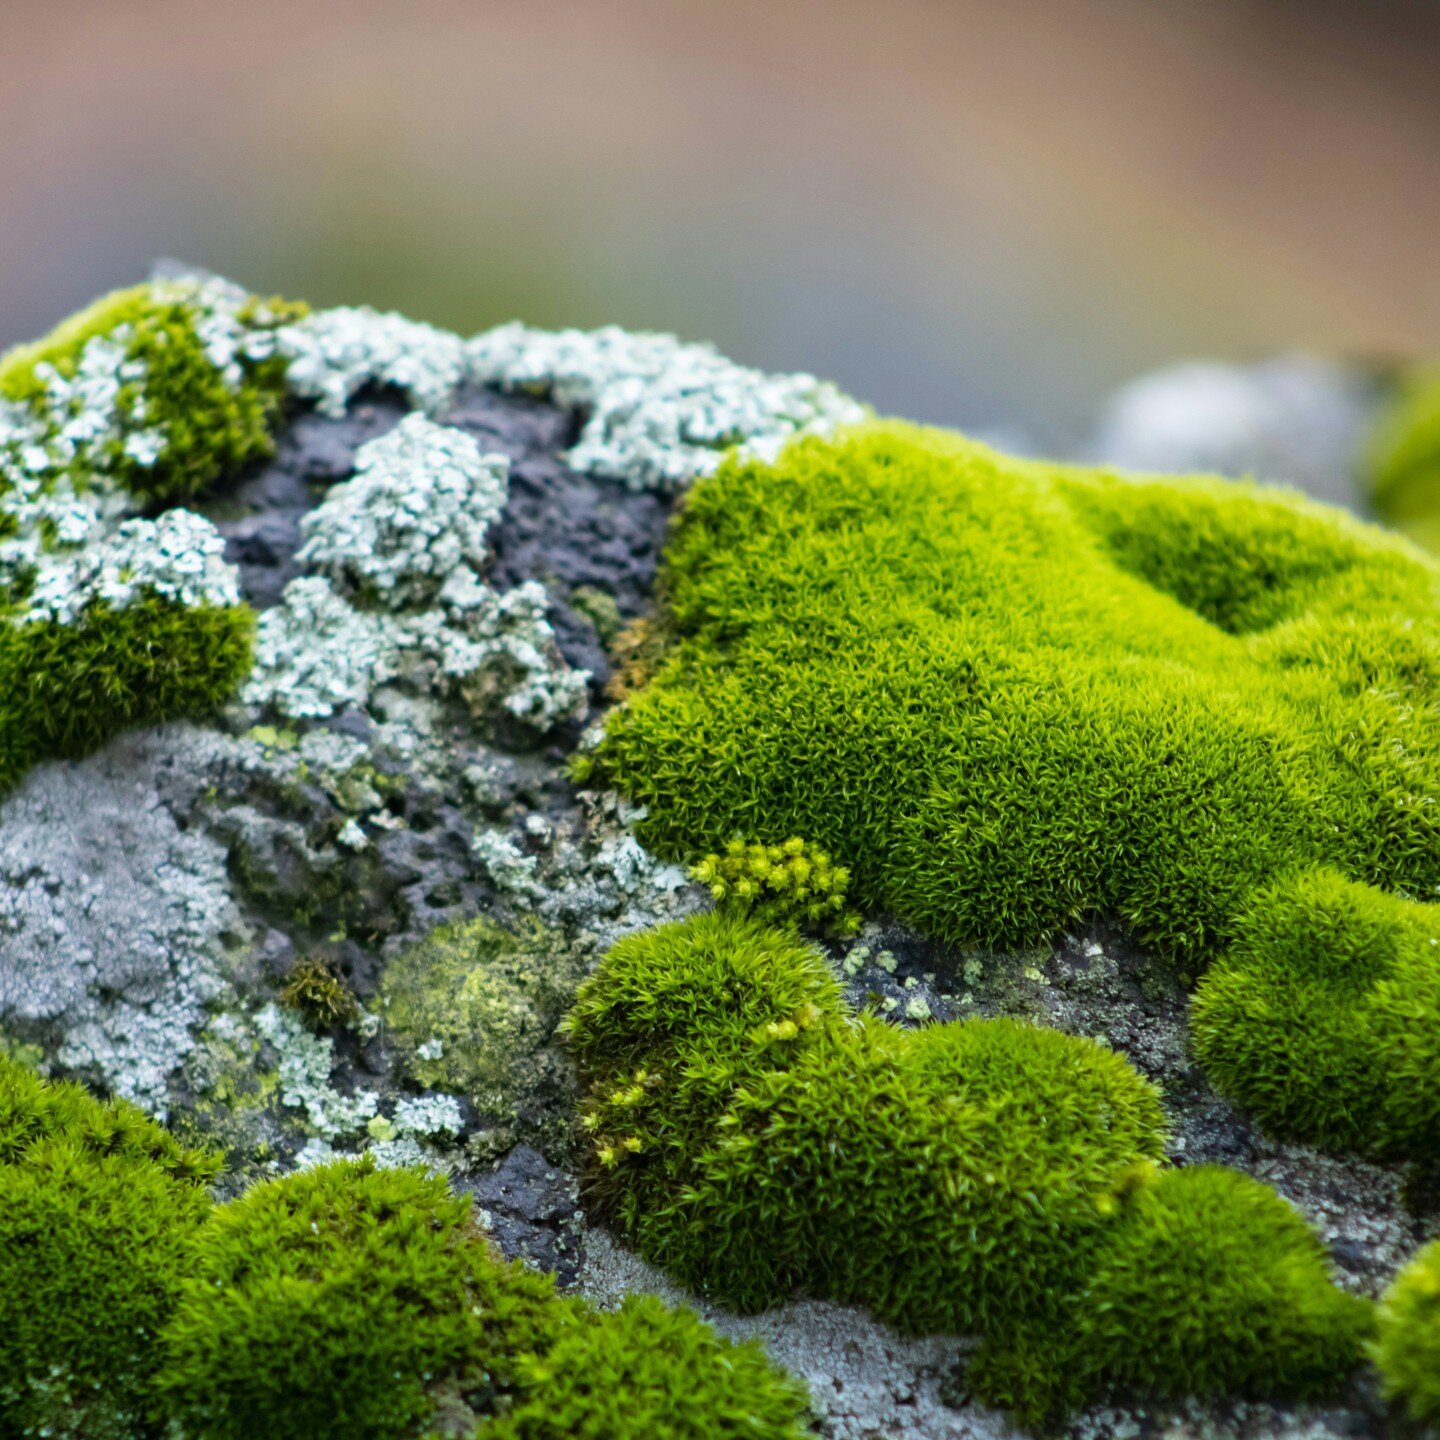 #Mosses and liverworts are everywhere in #Scotland, adding #colour and interest to both the most mundane and the most extreme of #habitats. #CaledonianRewilding 🌿 🐿️